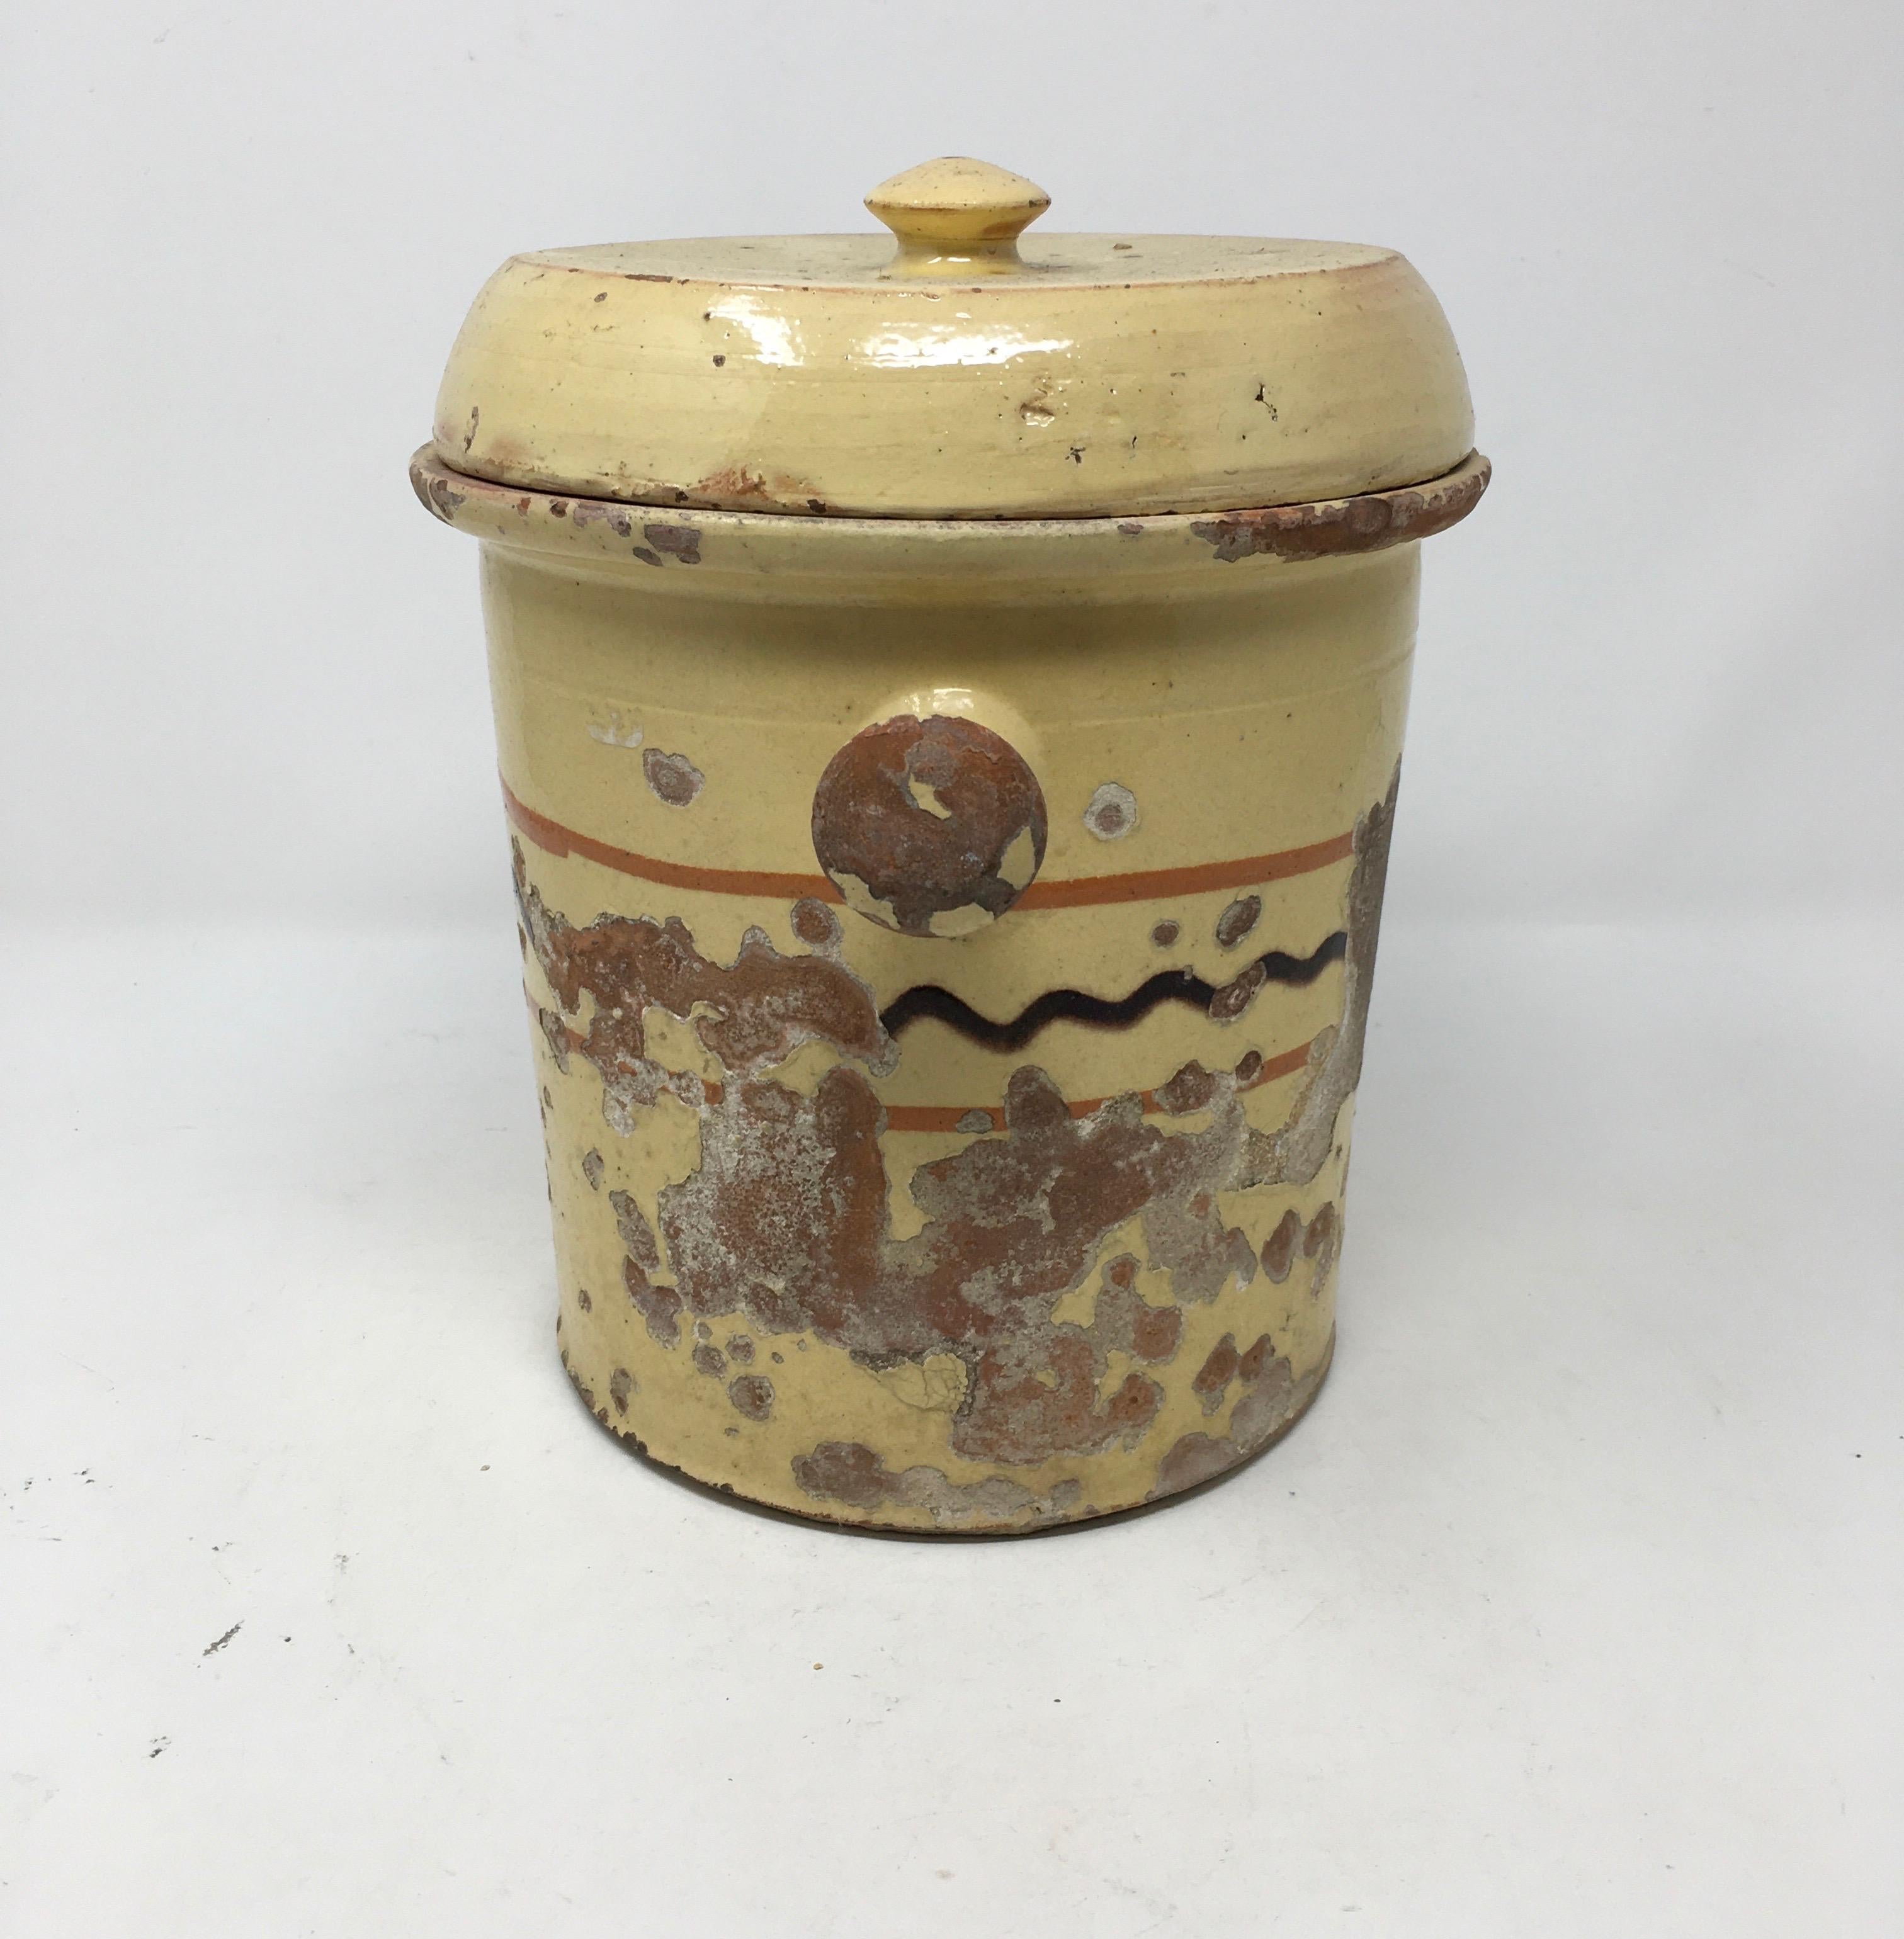 We found this antique Alsatian glazed earthenware preserving/pickling jar in France. These crocks were used to preserve vegetables and retain their nutrients for the winter months. The crock, glazed yellow and painted with a pattern typical of